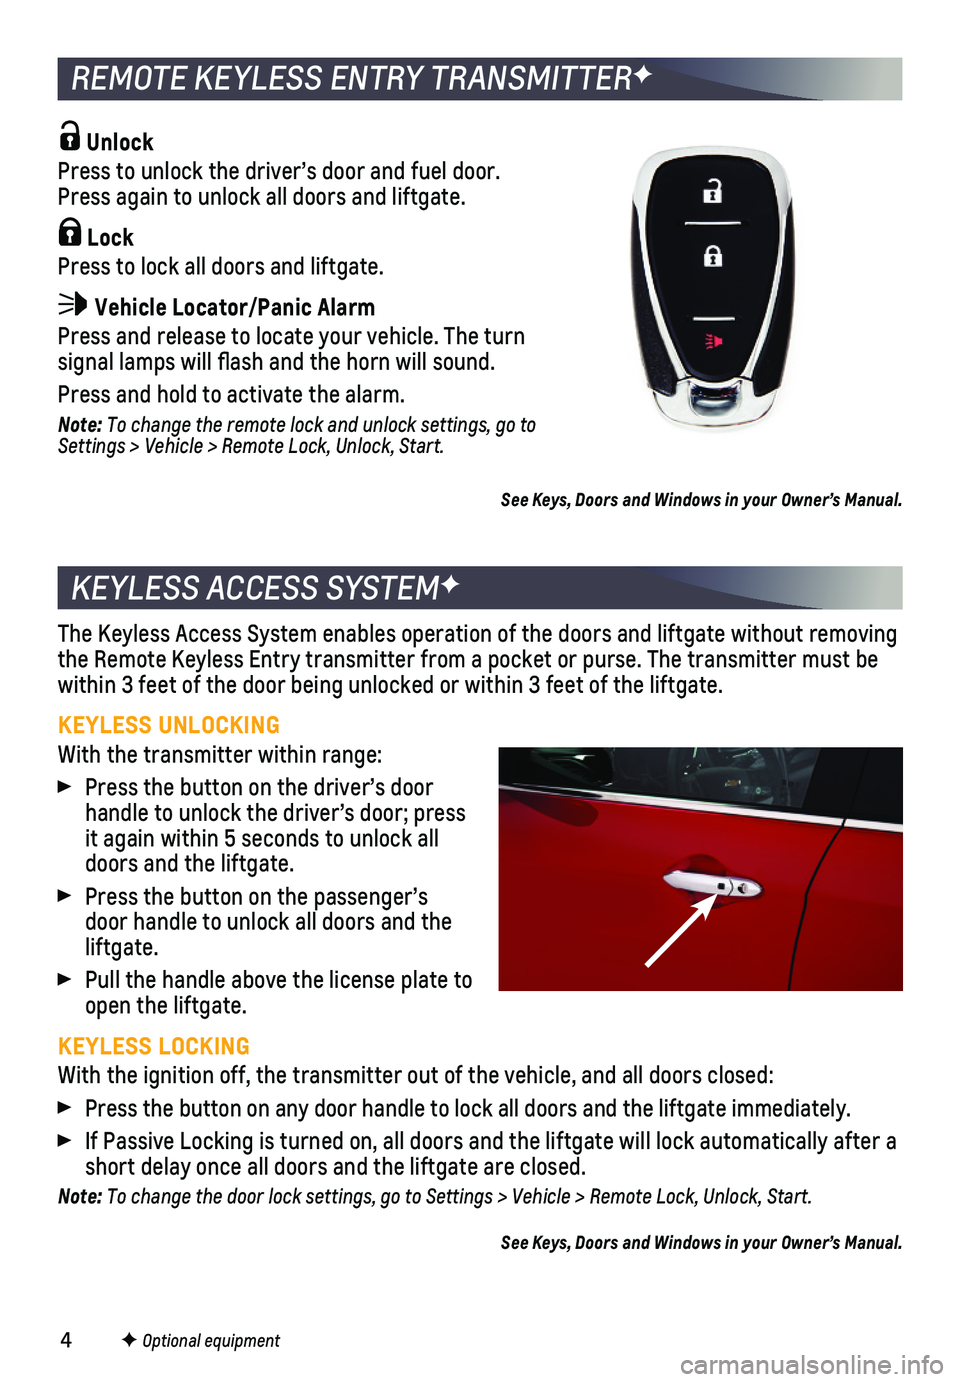 CHEVROLET SPARK 2020  Get To Know Guide 4
KEYLESS ACCESS SYSTEMF
The Keyless Access System enables operation of the doors and liftgate wi\
thout removing the Remote Keyless Entry transmitter from a pocket or purse. The transmi\
tter must be